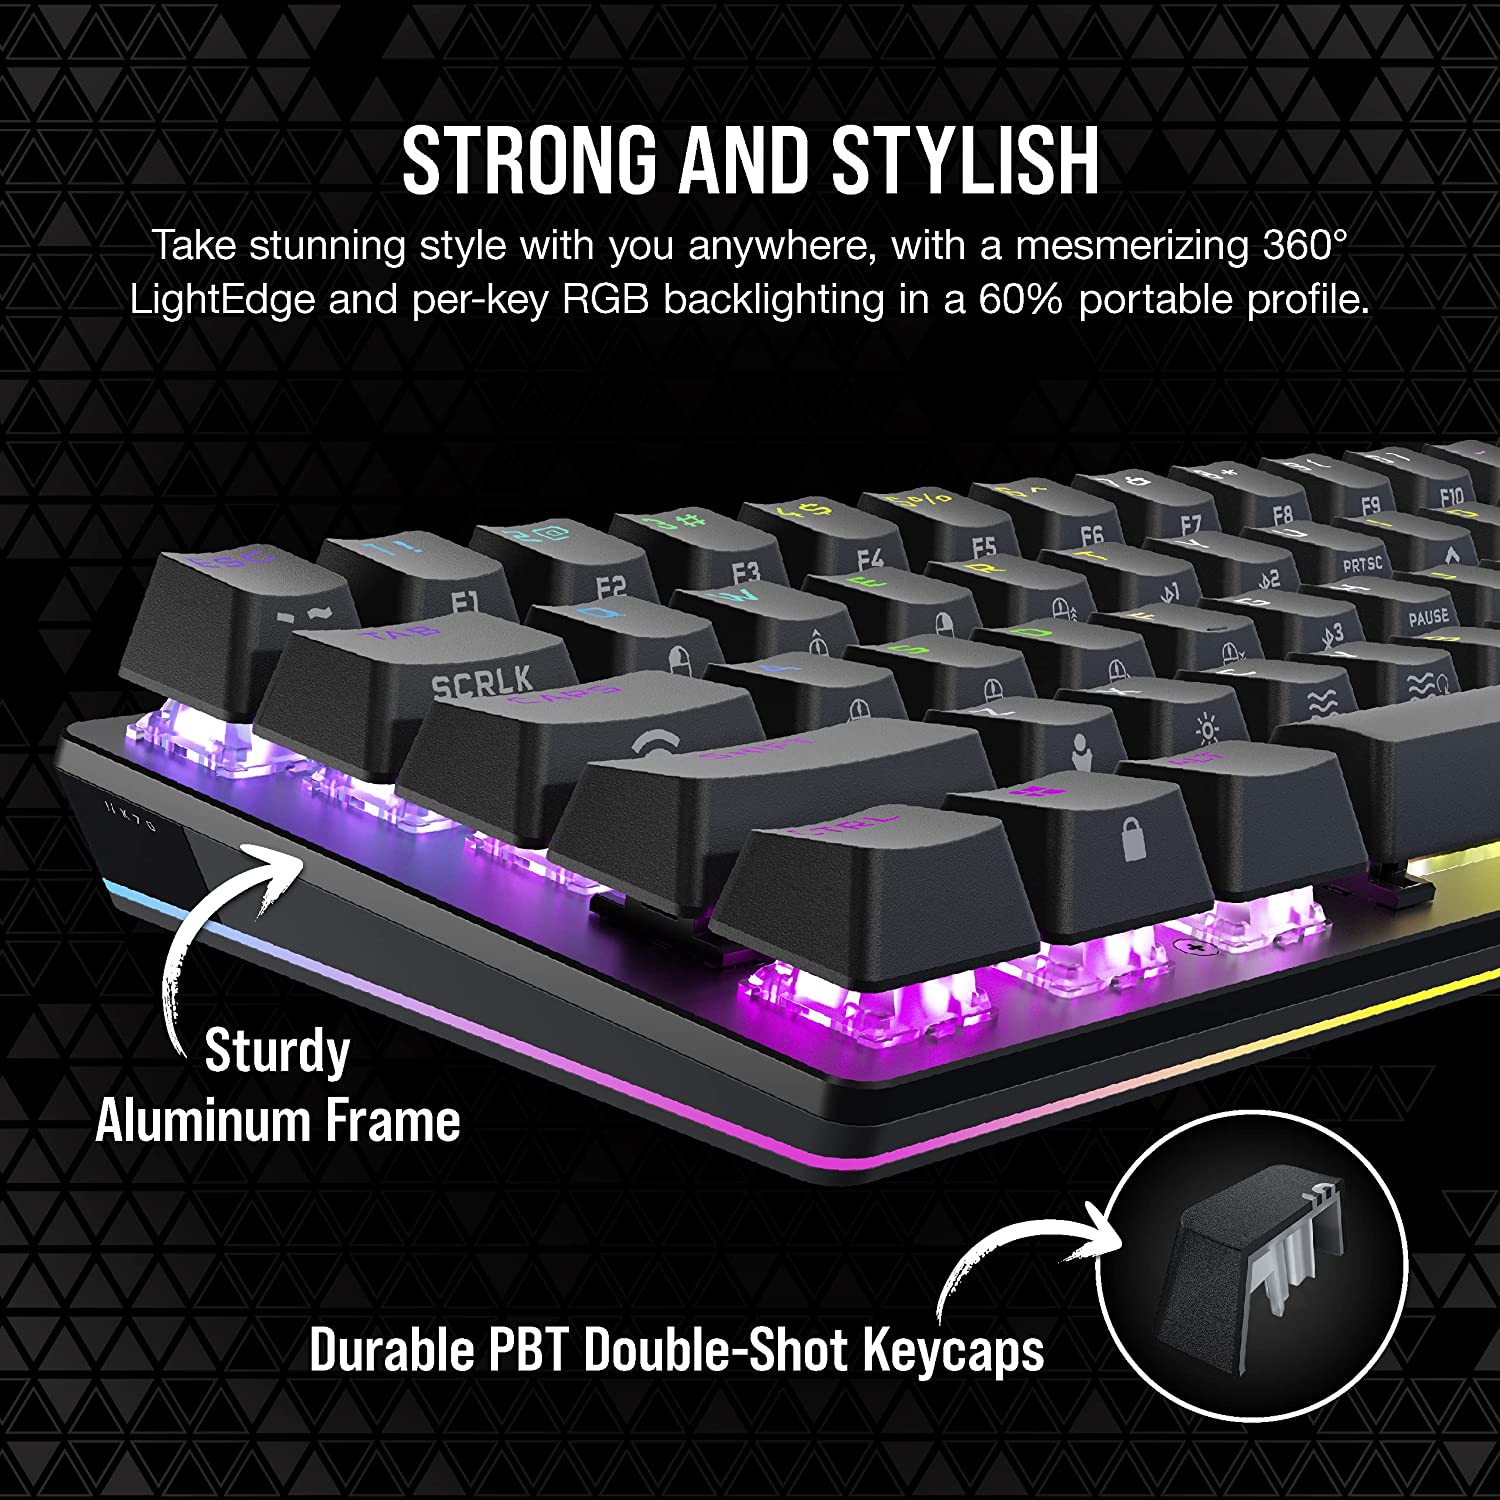 A SMALL, PACKED WITH FEATURES GAMING KEYBOARD, CORSAIR K70 PRO MINI WIRELESS REVIEW